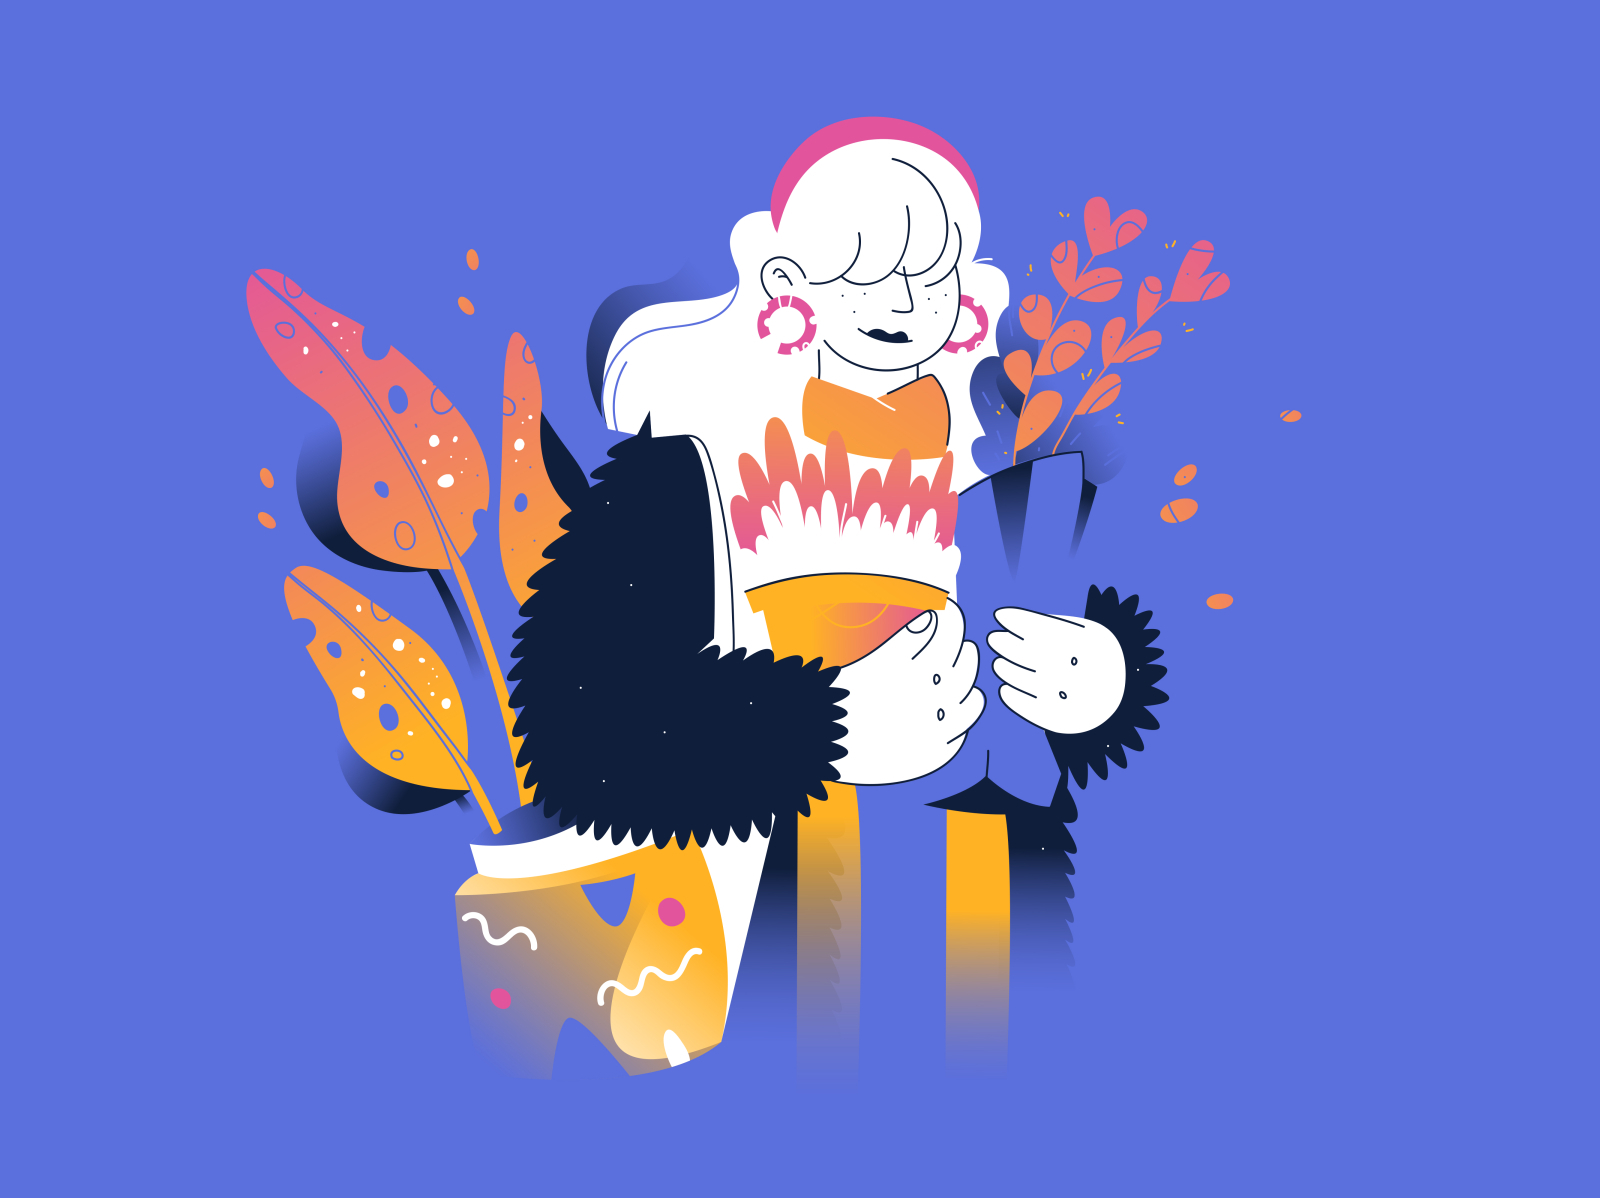 With Plants by Anna Magura on Dribbble